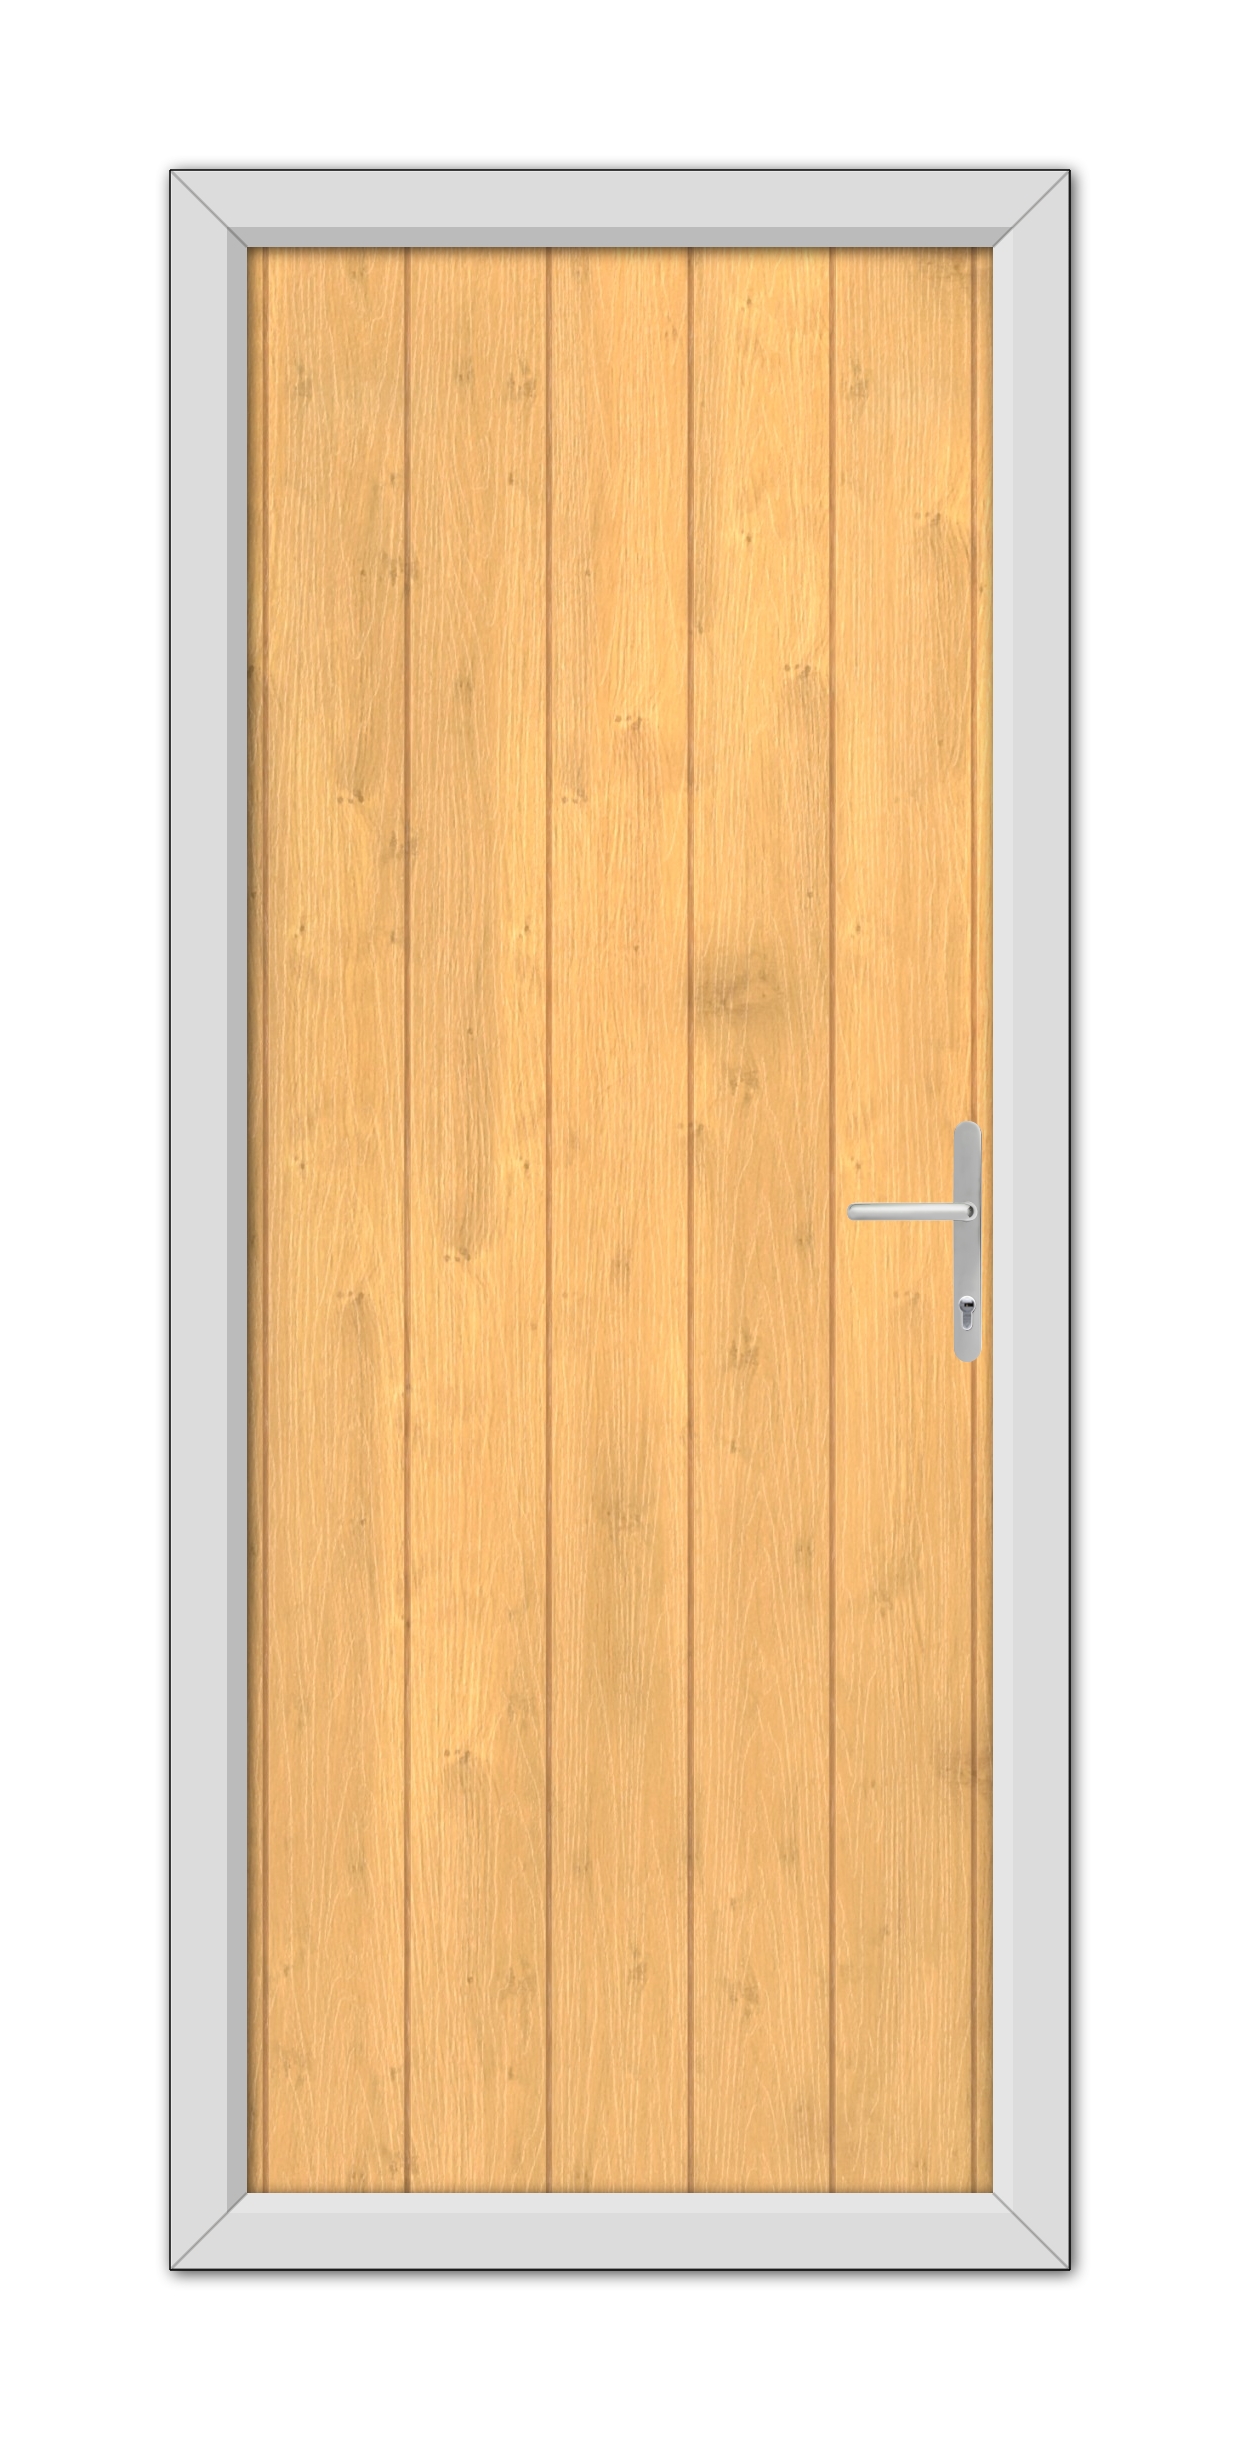 An Irish Oak Norfolk Solid Composite Door 48mm Timber Core with a silver handle, framed by a gray metal door frame, viewed from the front.